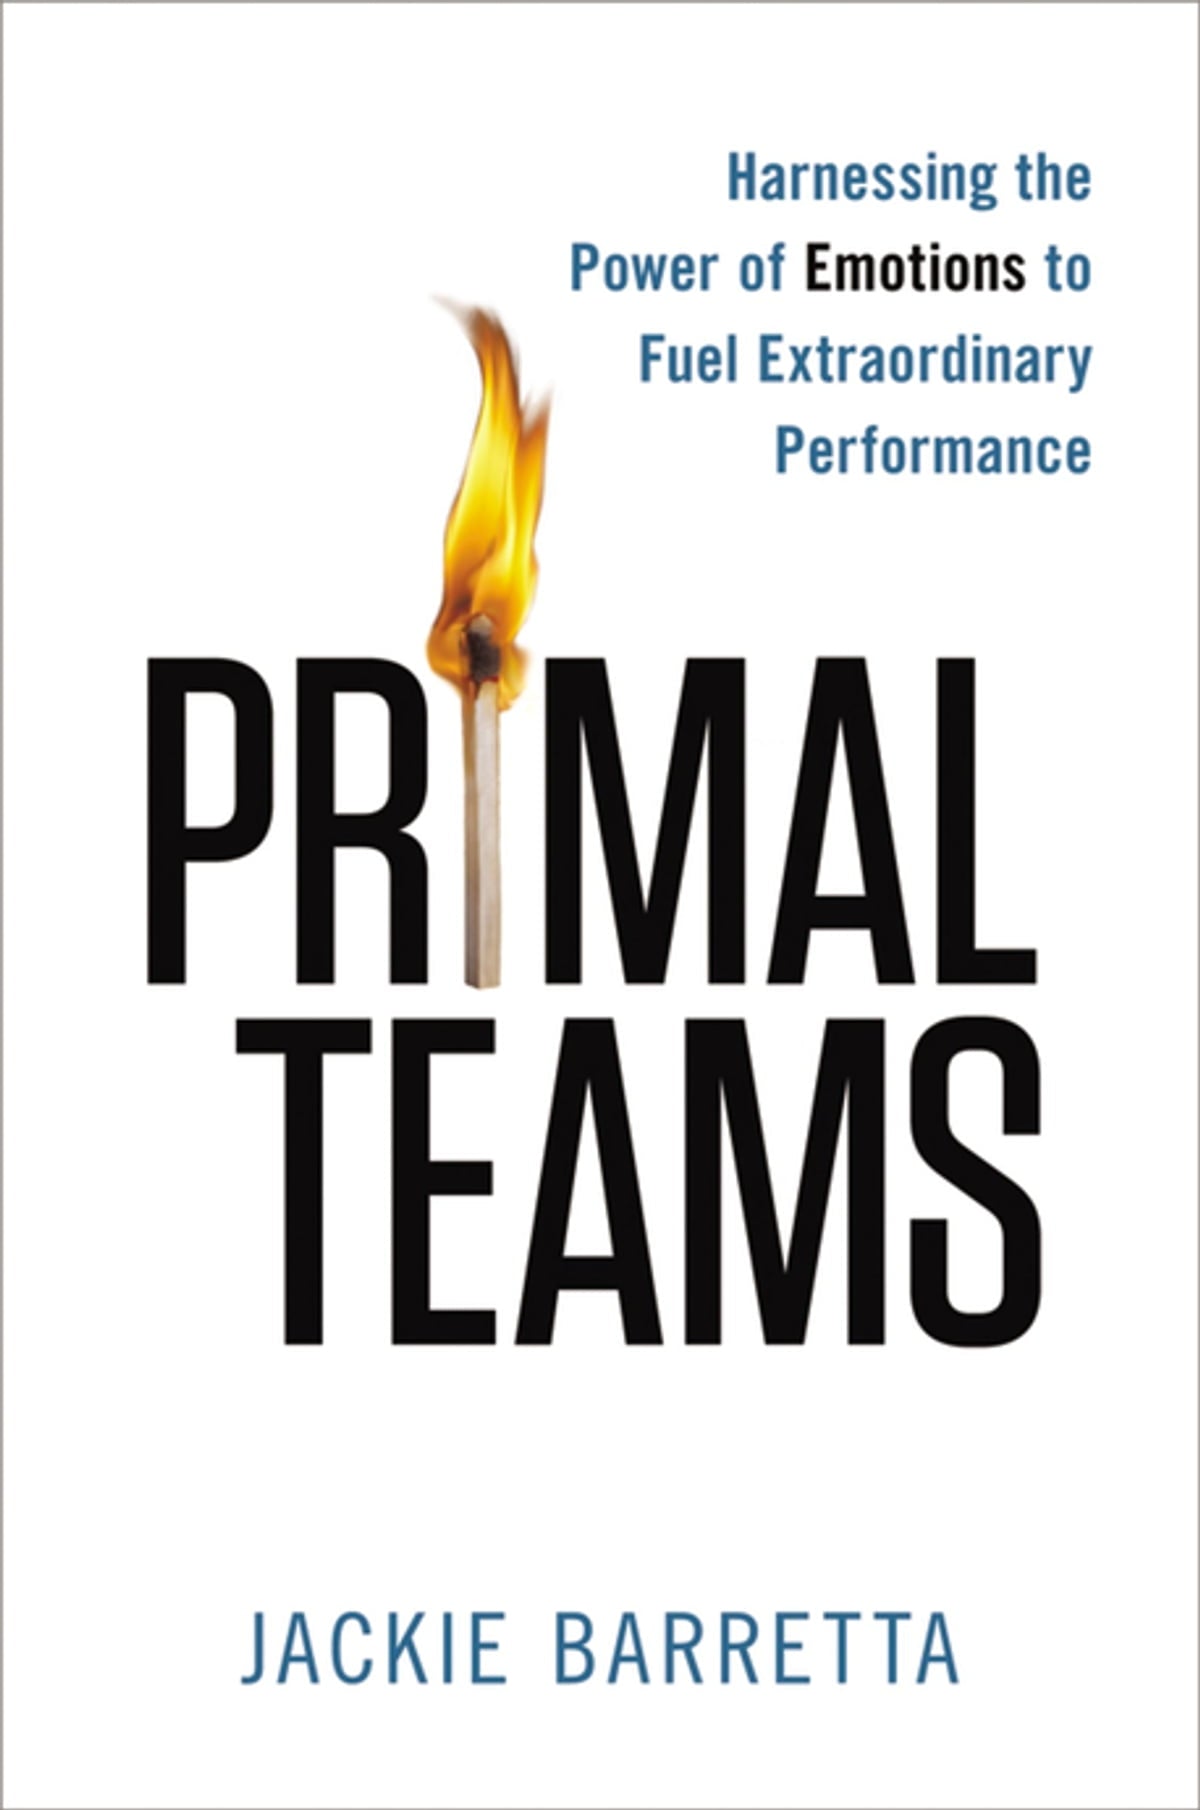 Primal Teams: Harnessing the Power of Emotions to Fuel Extraordinary Performance by Jackie Barretta